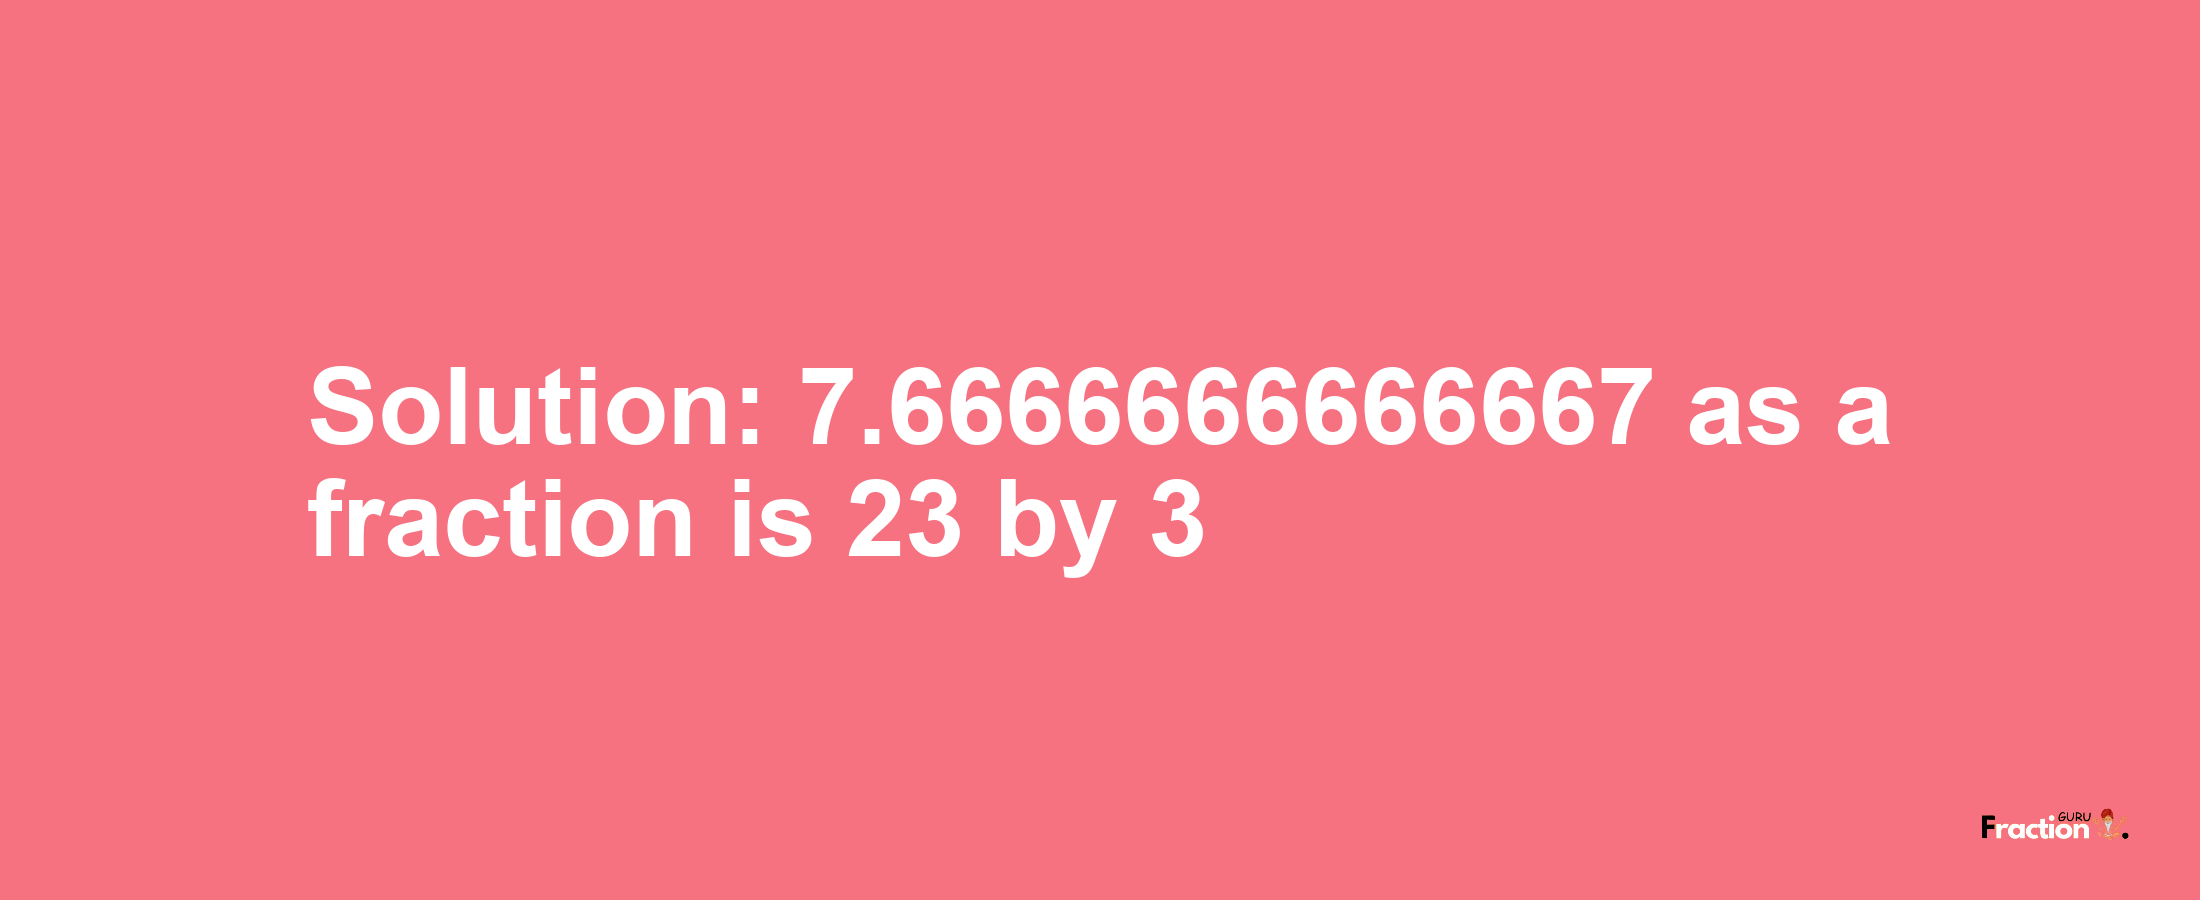 Solution:7.6666666666667 as a fraction is 23/3